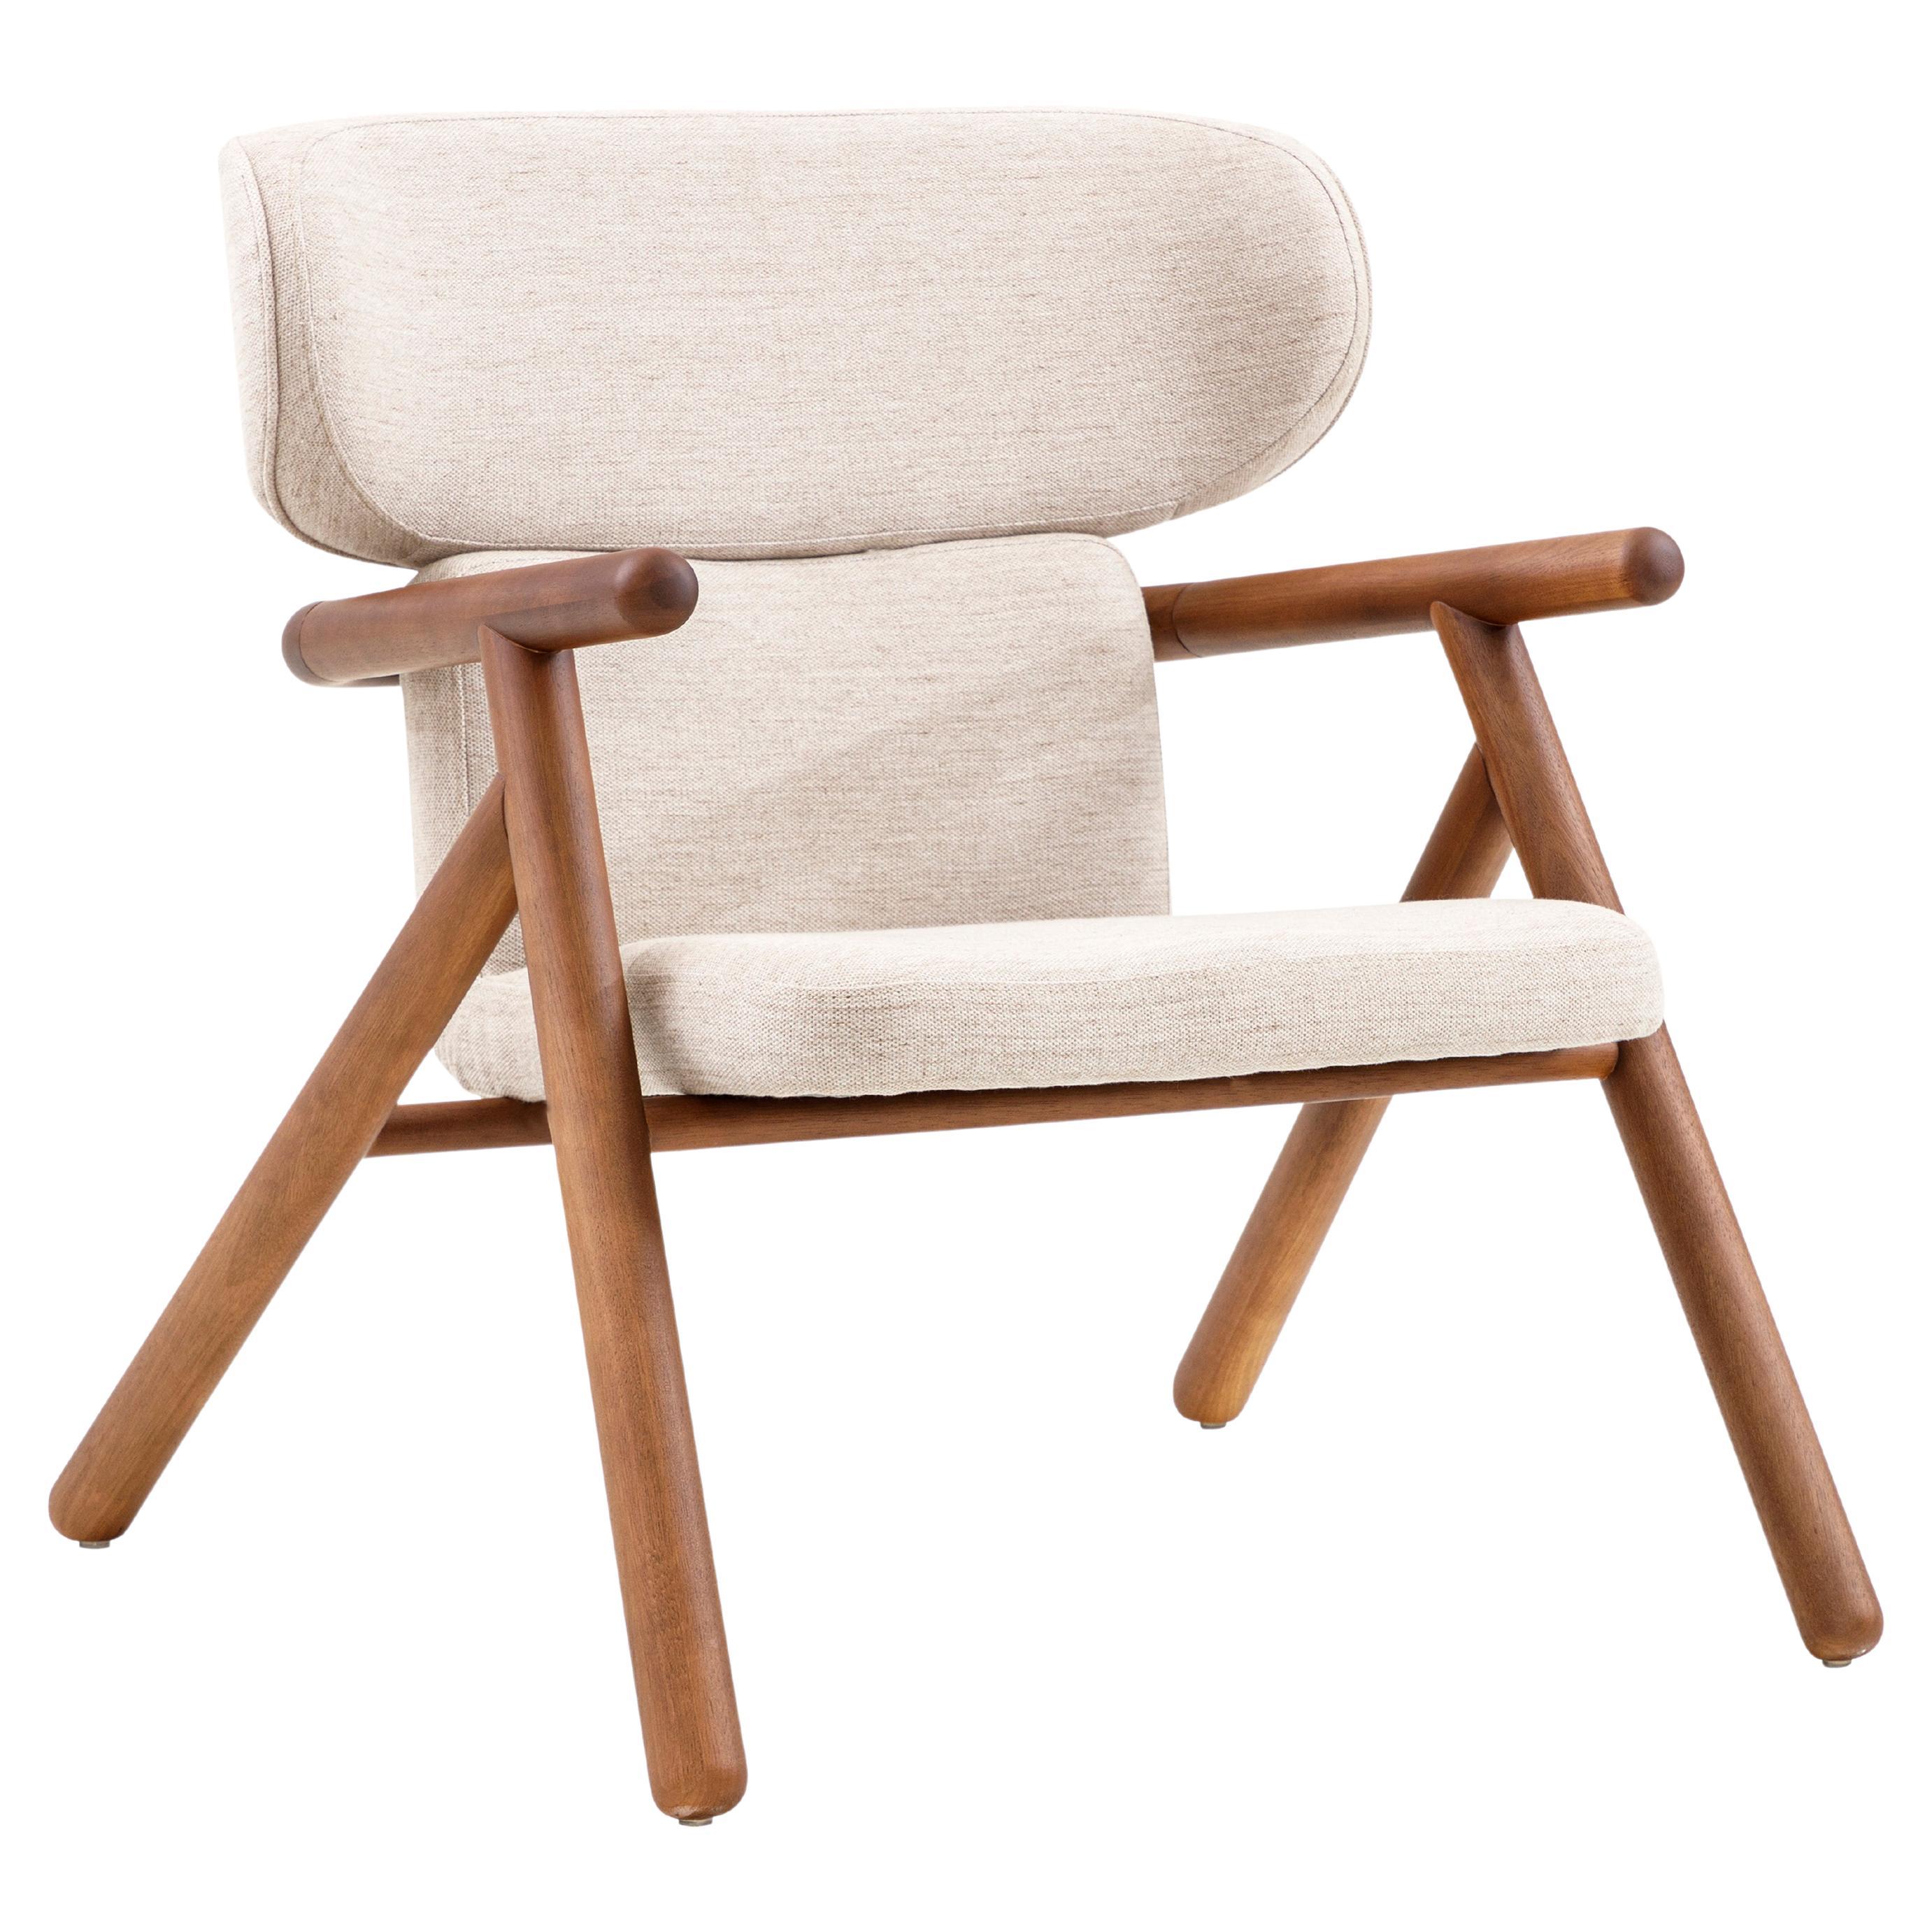 Sole Scandinavian-Styled Armchair in Walnut Wood Finish and Off-White Fabric